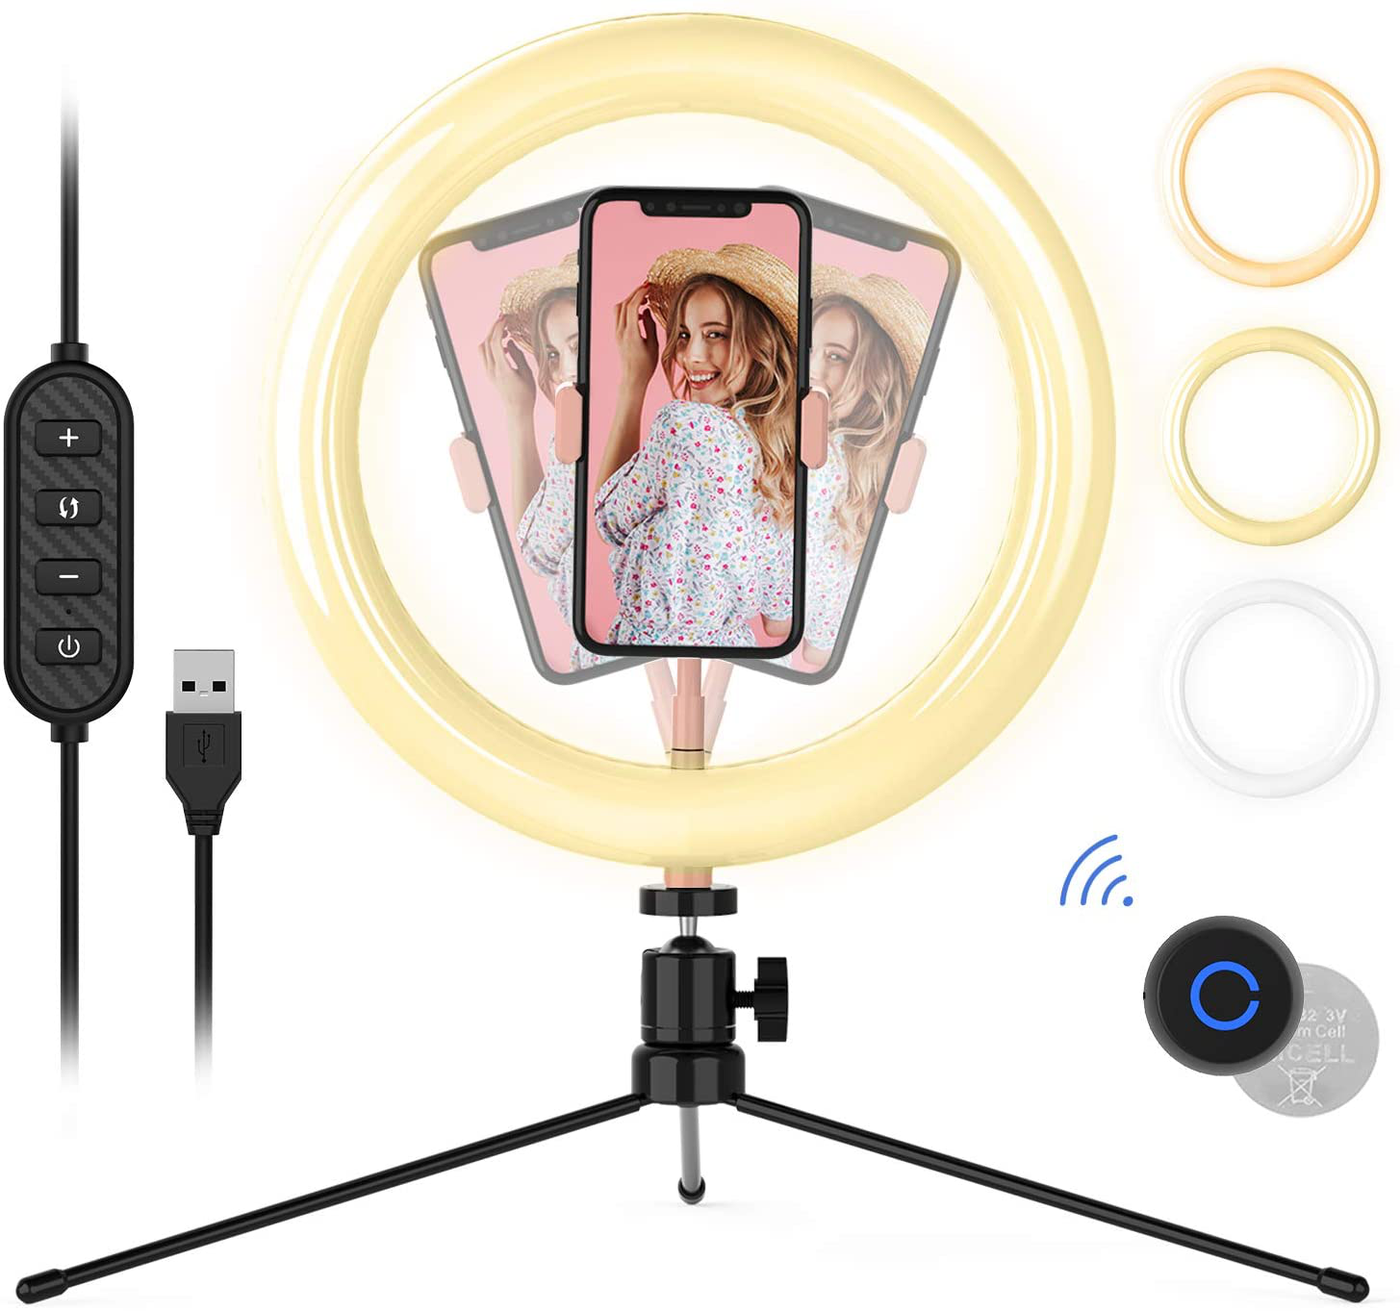 10" LED Ring Light with Tripod Stand & Phone Holder, Upgraded Wireless Shutter, Dimmable Compatible with iOS/Android